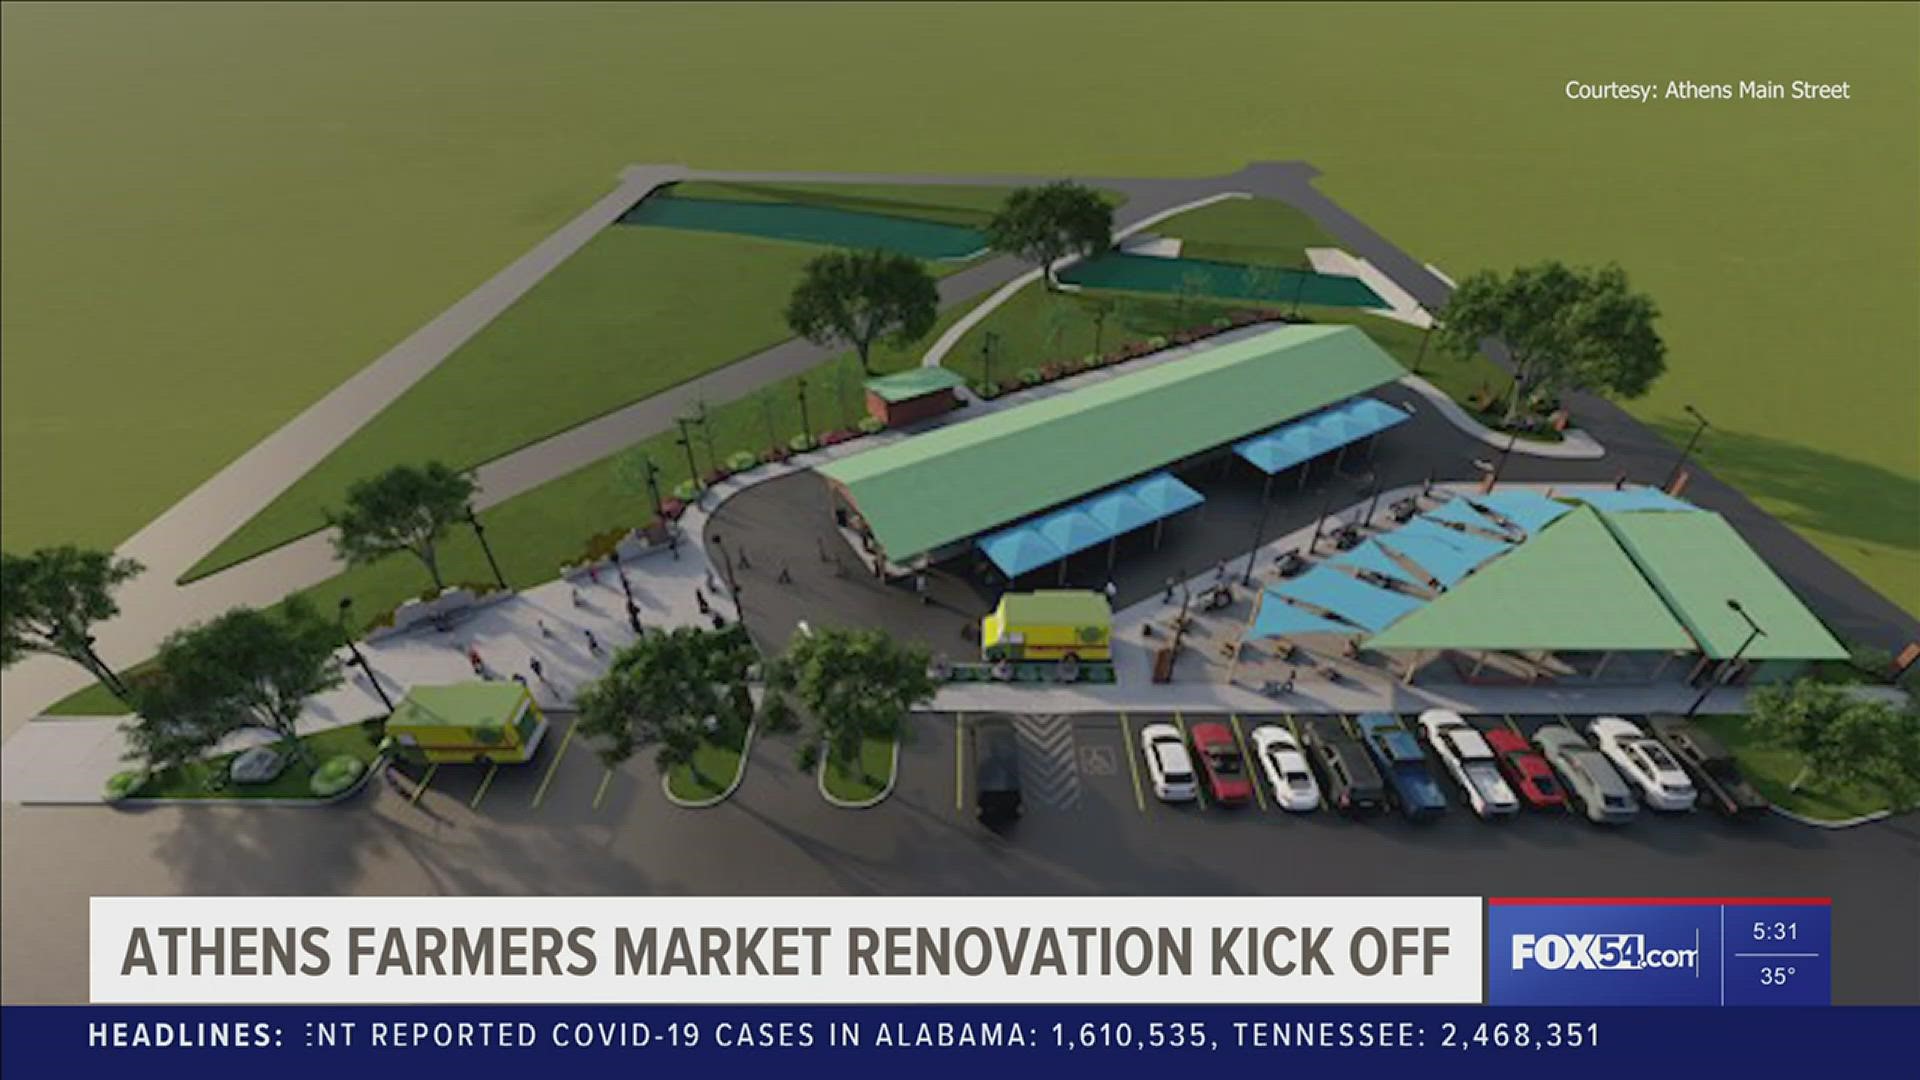 New roof, new tables, new art, and new activities are coming to the Limestone County Farmers Markets in Athens, AL.